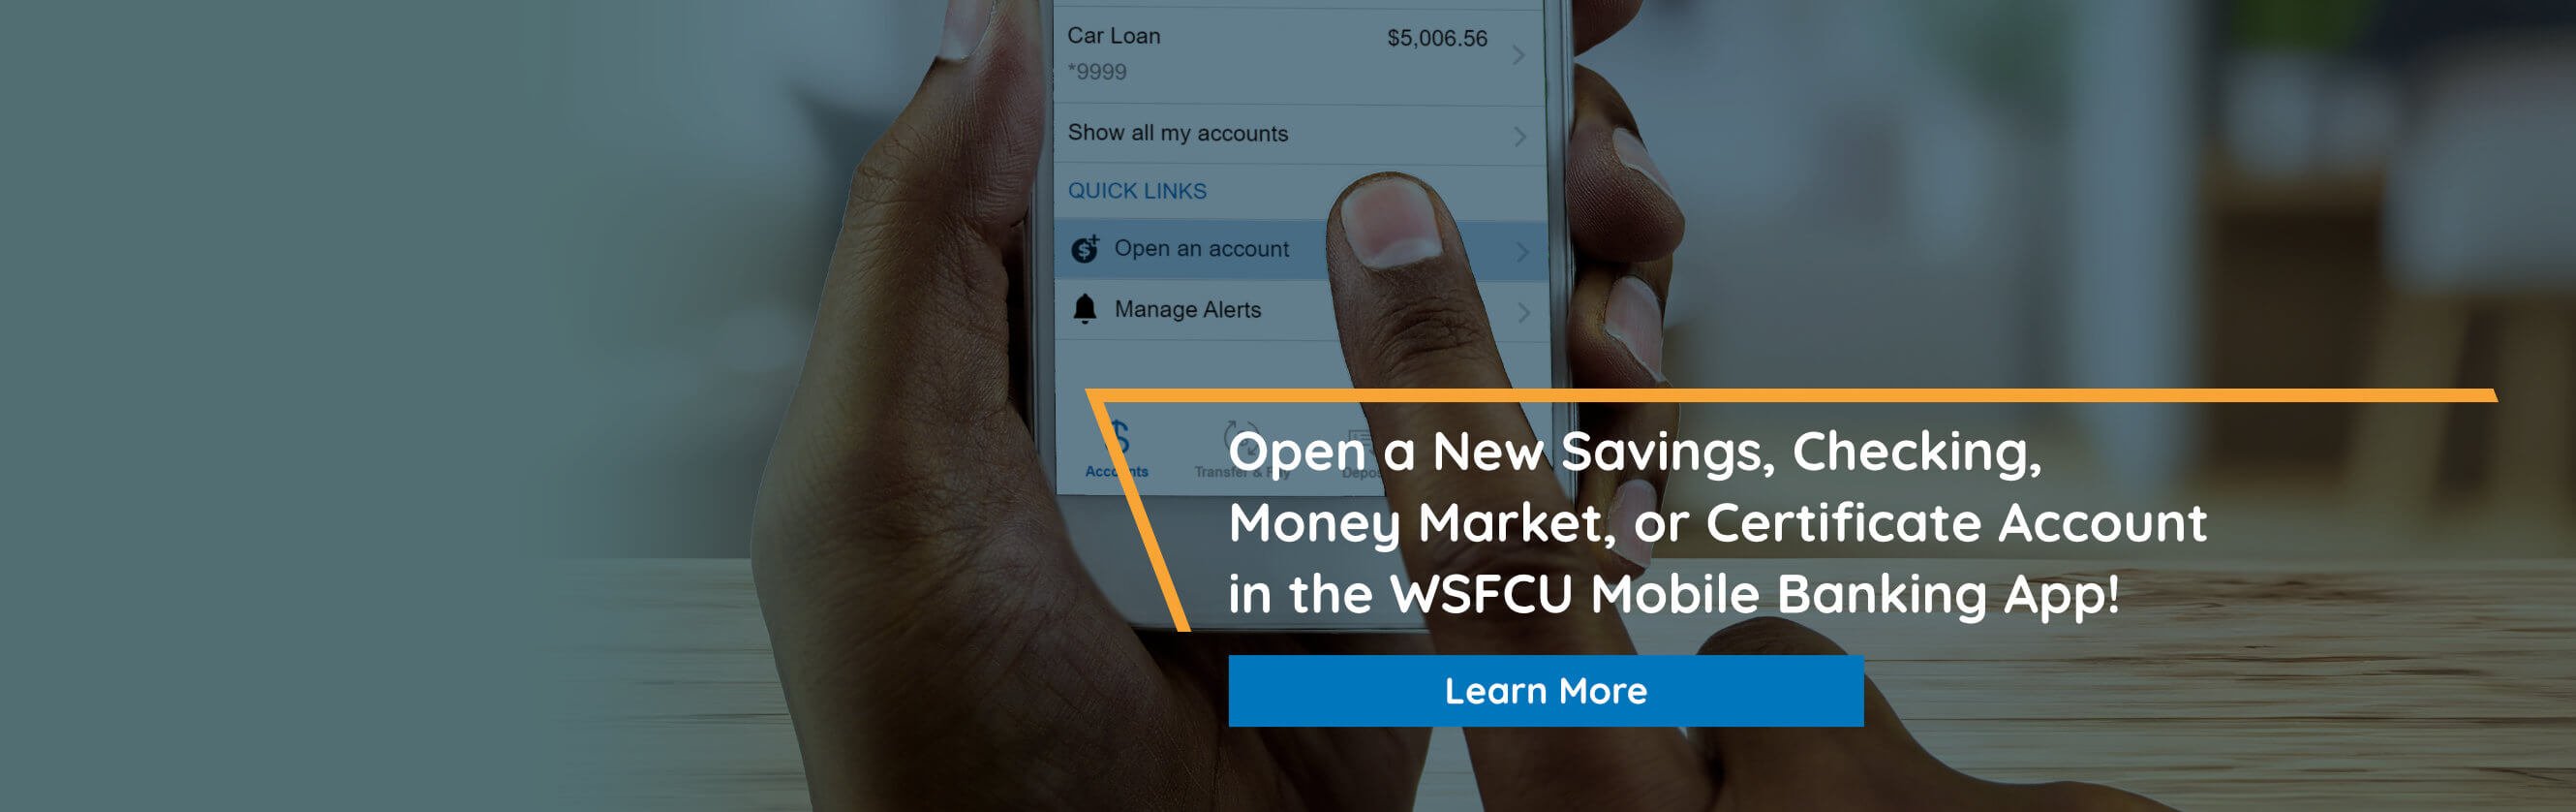 Open a new Savings, Checking, Money Market, or Certificate account in the WSFCU Mobile Banking App. Learn More.